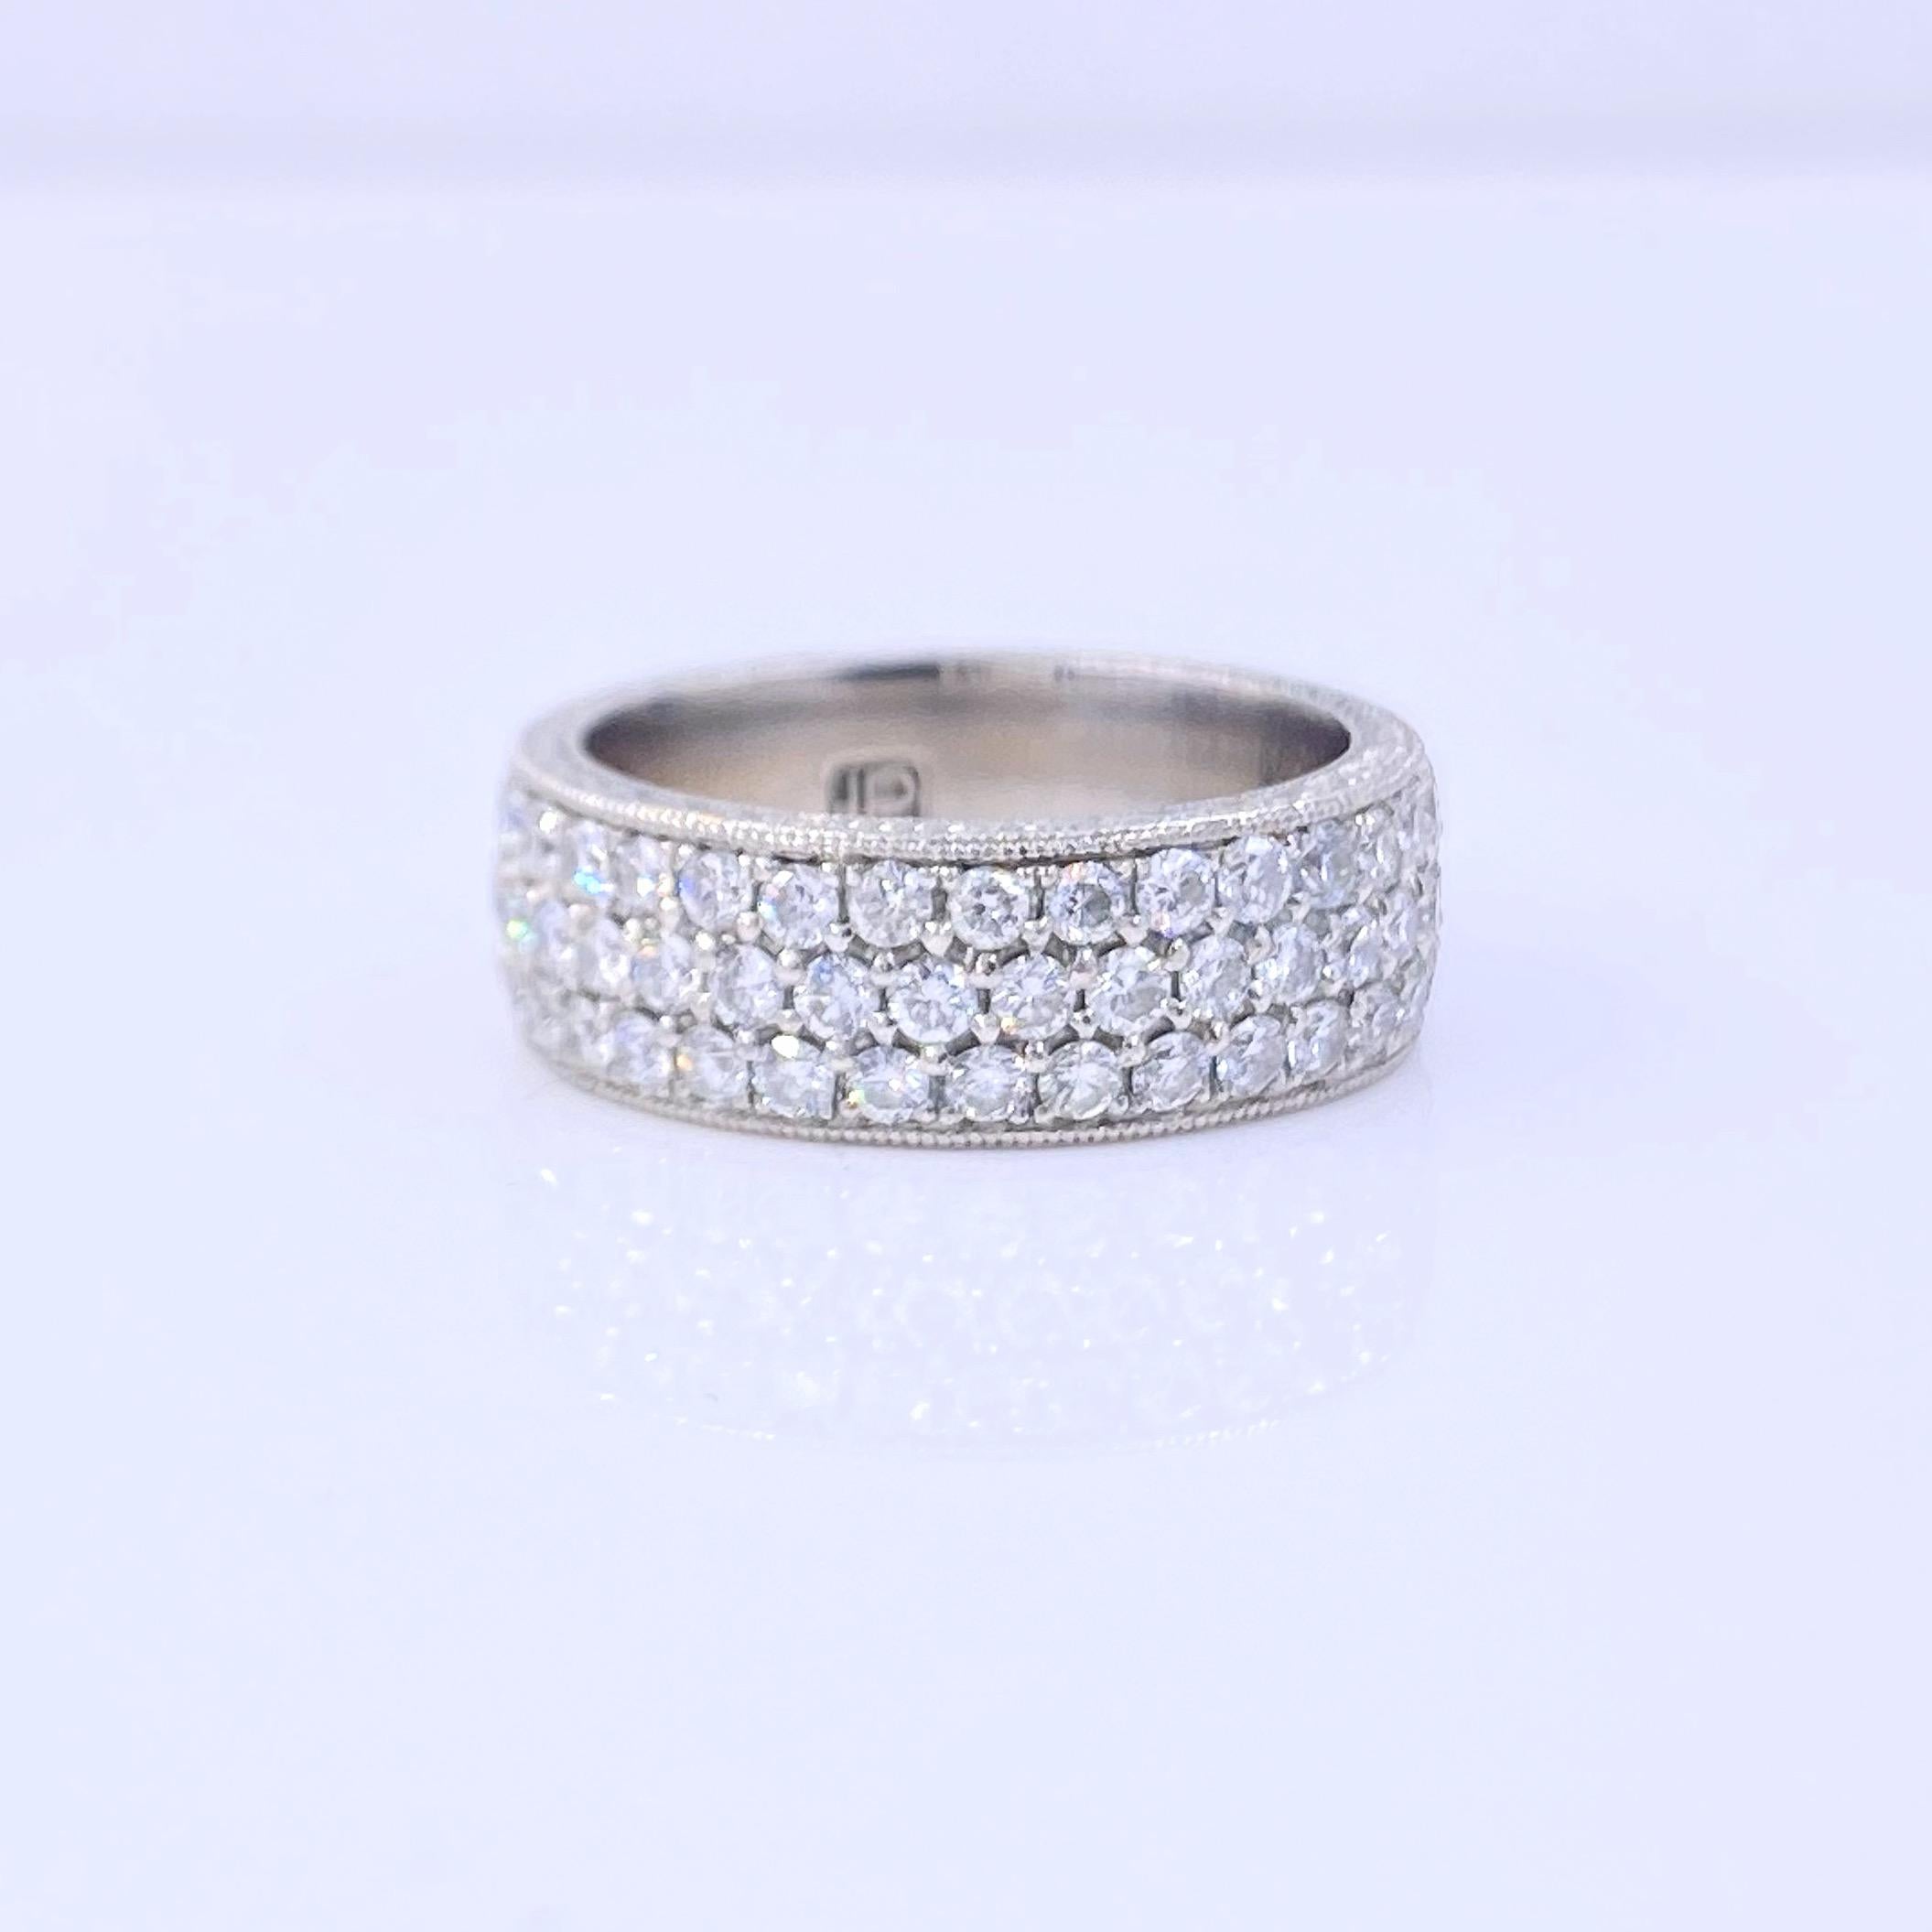 Three-Row Round Diamond Eternity Band Ring 2.04 Carat Platinum In Excellent Condition For Sale In San Diego, CA